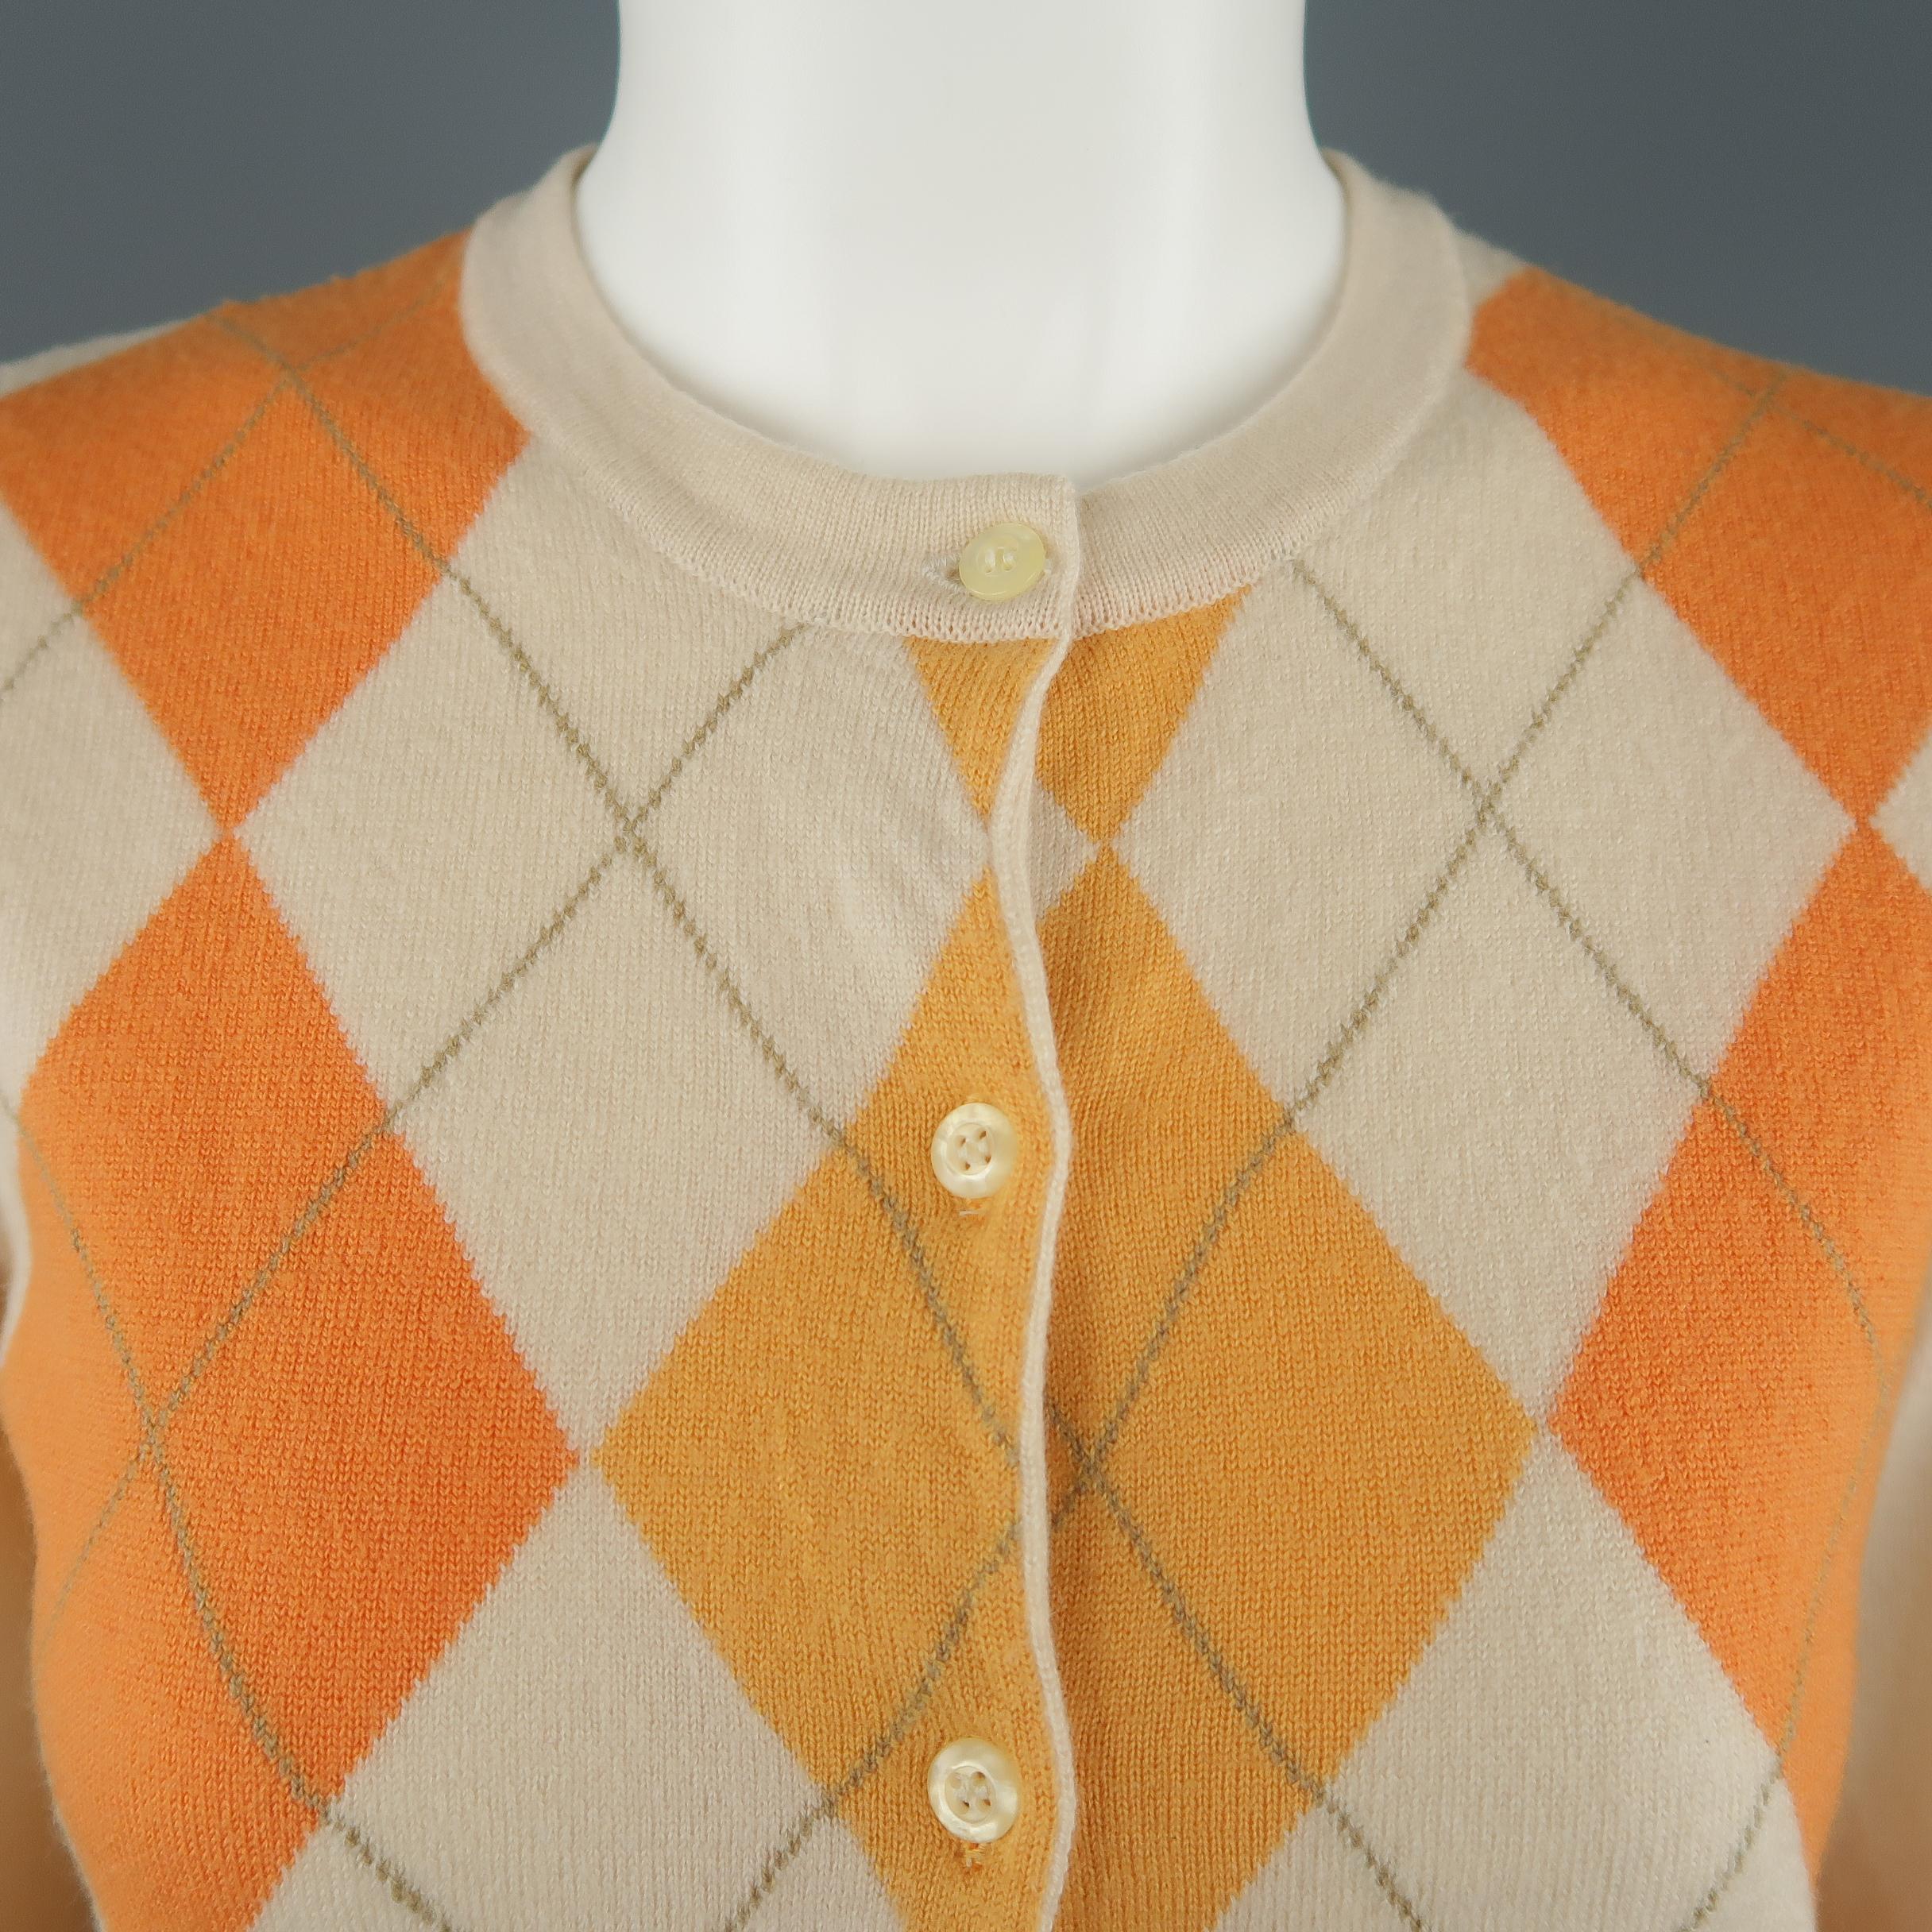 PIERRE BALMAIN cardigan comes in pastel orange cashmere with orange argyle front, crewneck, and button up front.
 
Excellent Pre-Owned Condition.
Marked: L
 
Measurements:
 
Shoulder: 14 in.
Bust: 34 in.
Sleeve: 20 in.
Length: 21 in.